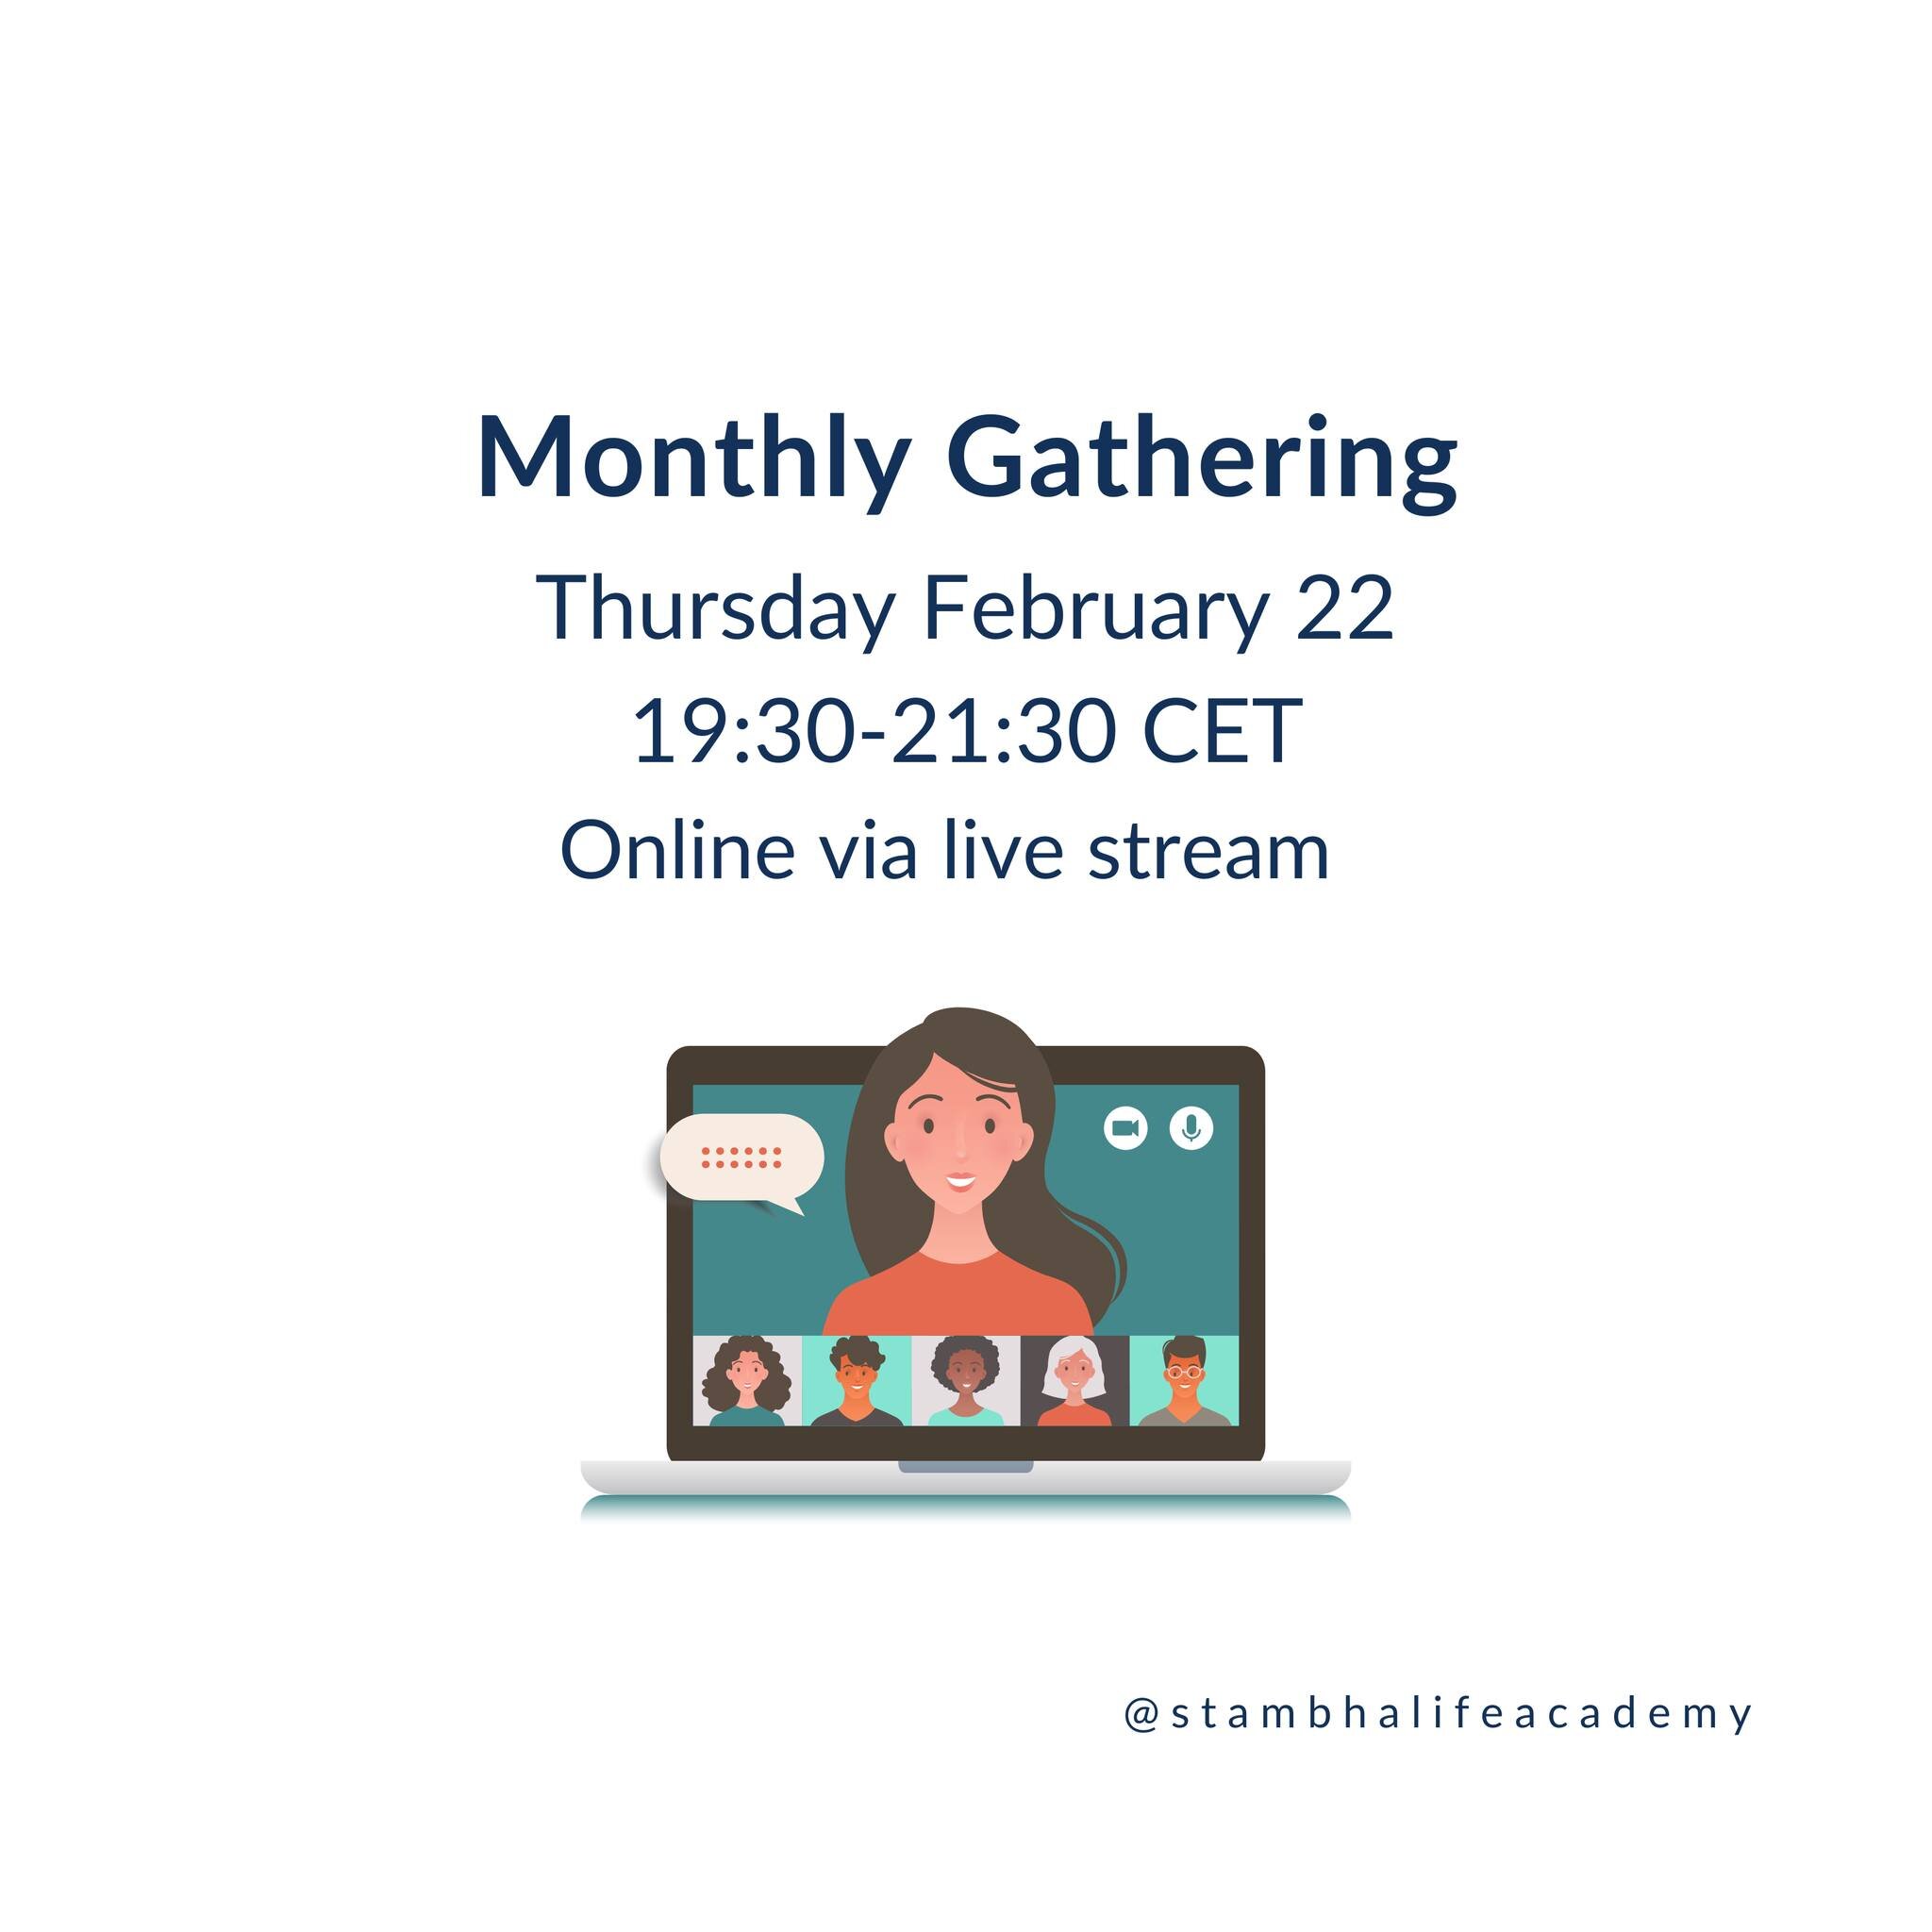 Join us for our next Monthly Gathering🌟

🗓️Thursday February 22

⏰19:30-21:30 CET [Online]

🌱 &quot;We know that the whole is greater than the sum of its parts, and when we get together, we create an accelerated path of growth supporting each othe